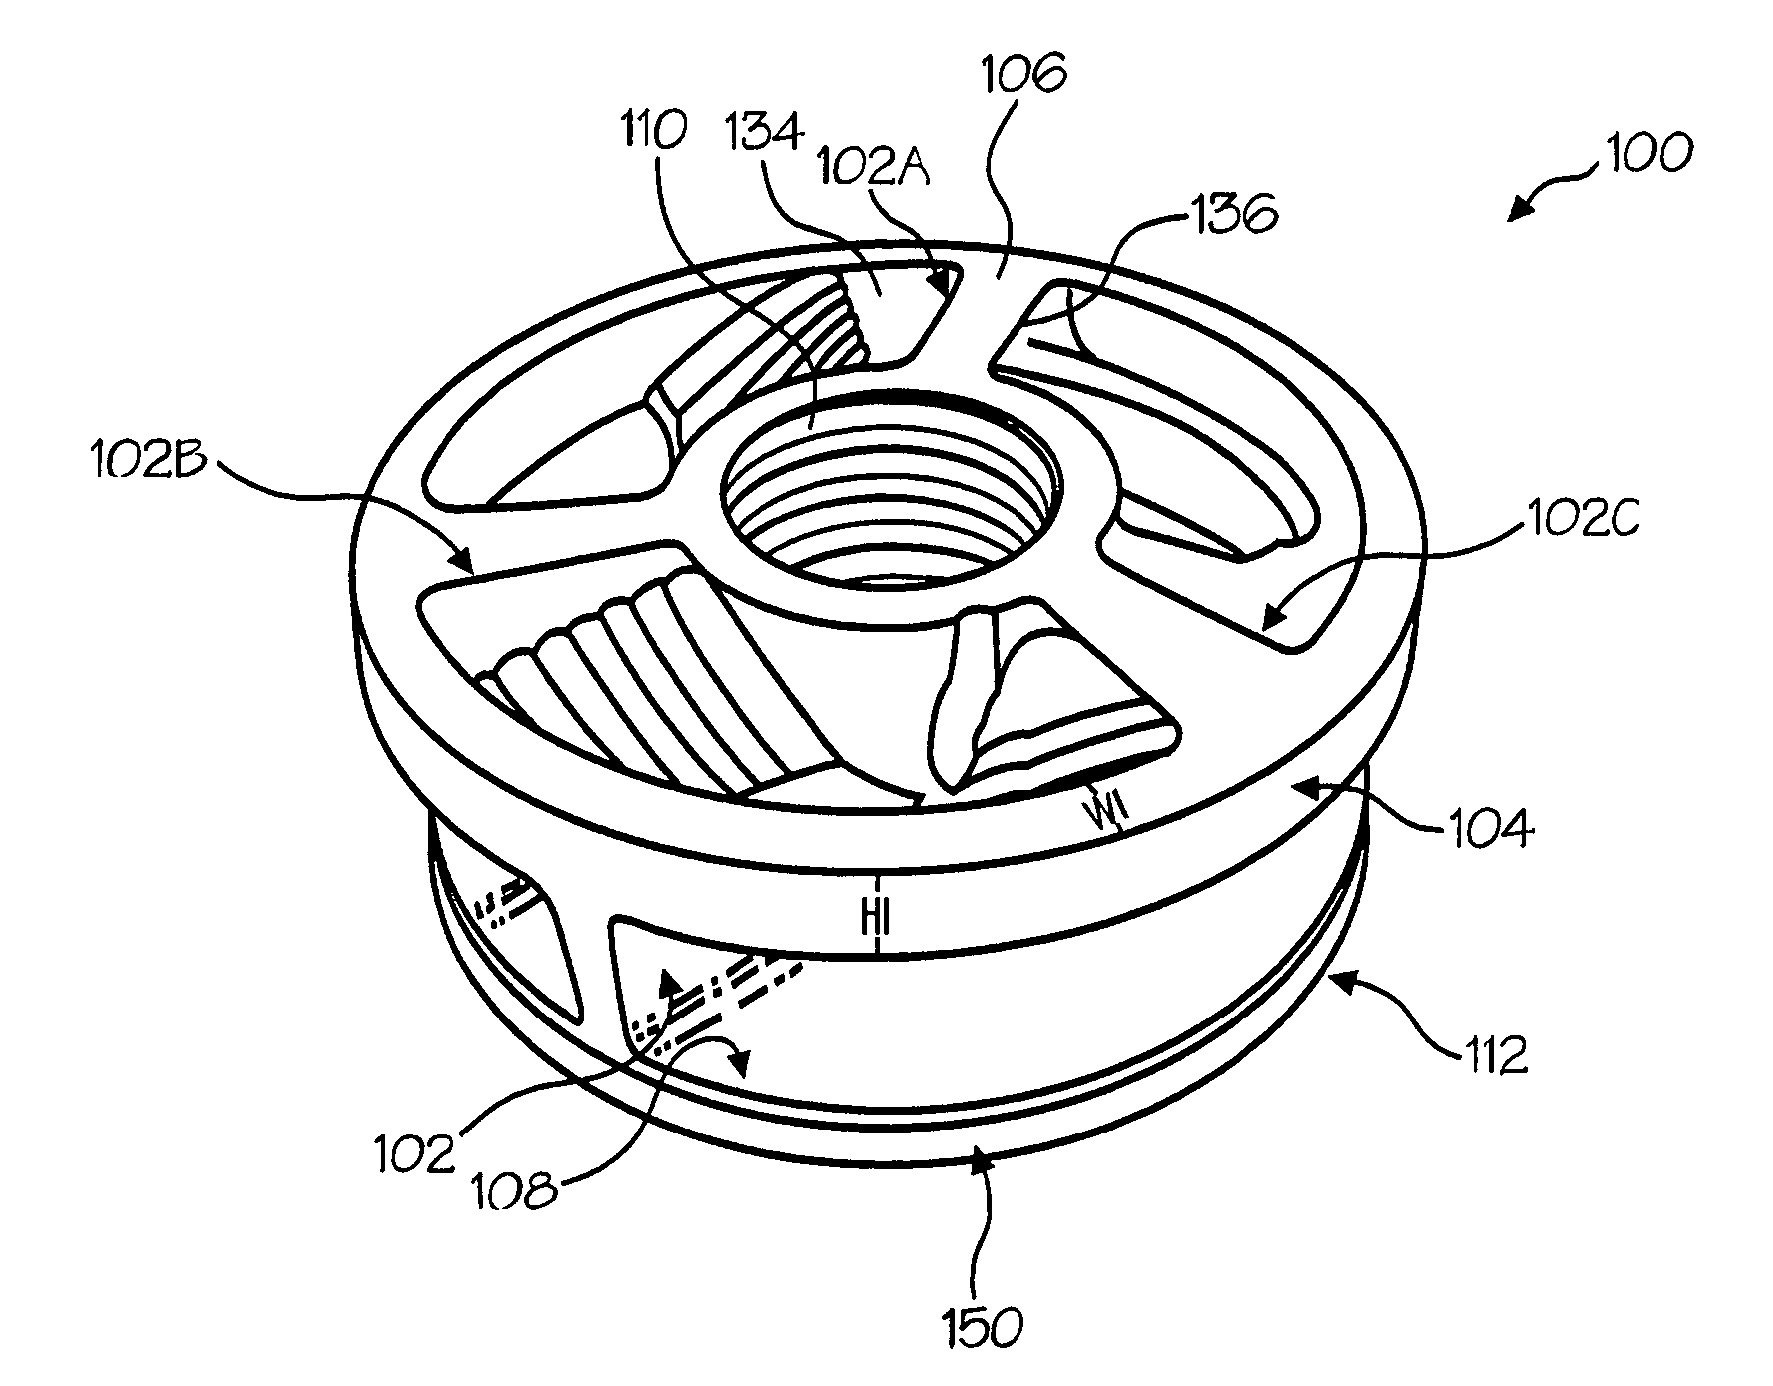 Pump with rotating inlet